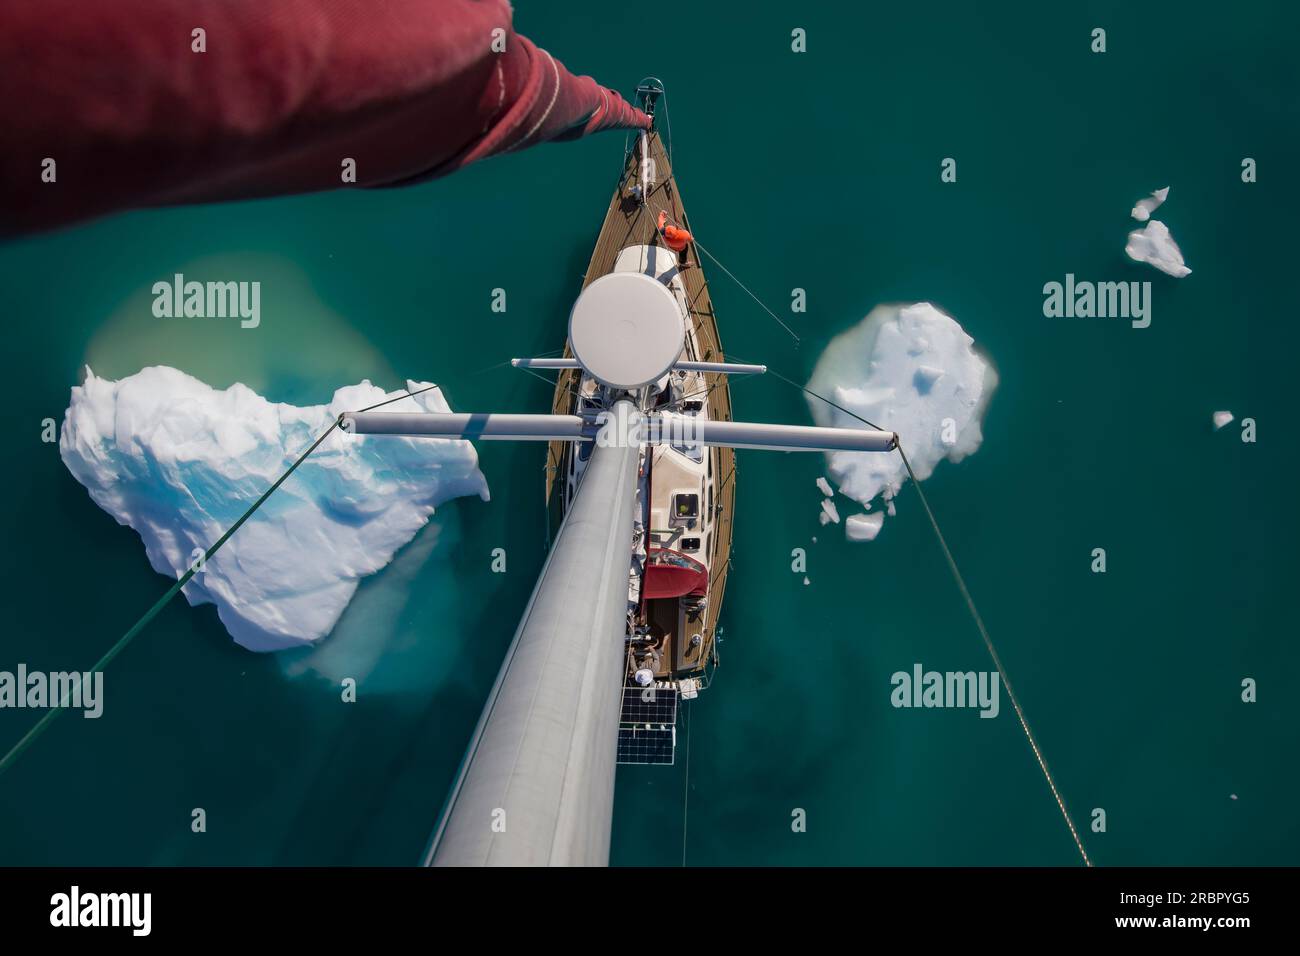 Icebergs surround Sailboat. View from the top of the mast. Beautiful turquoise water. Stock Photo